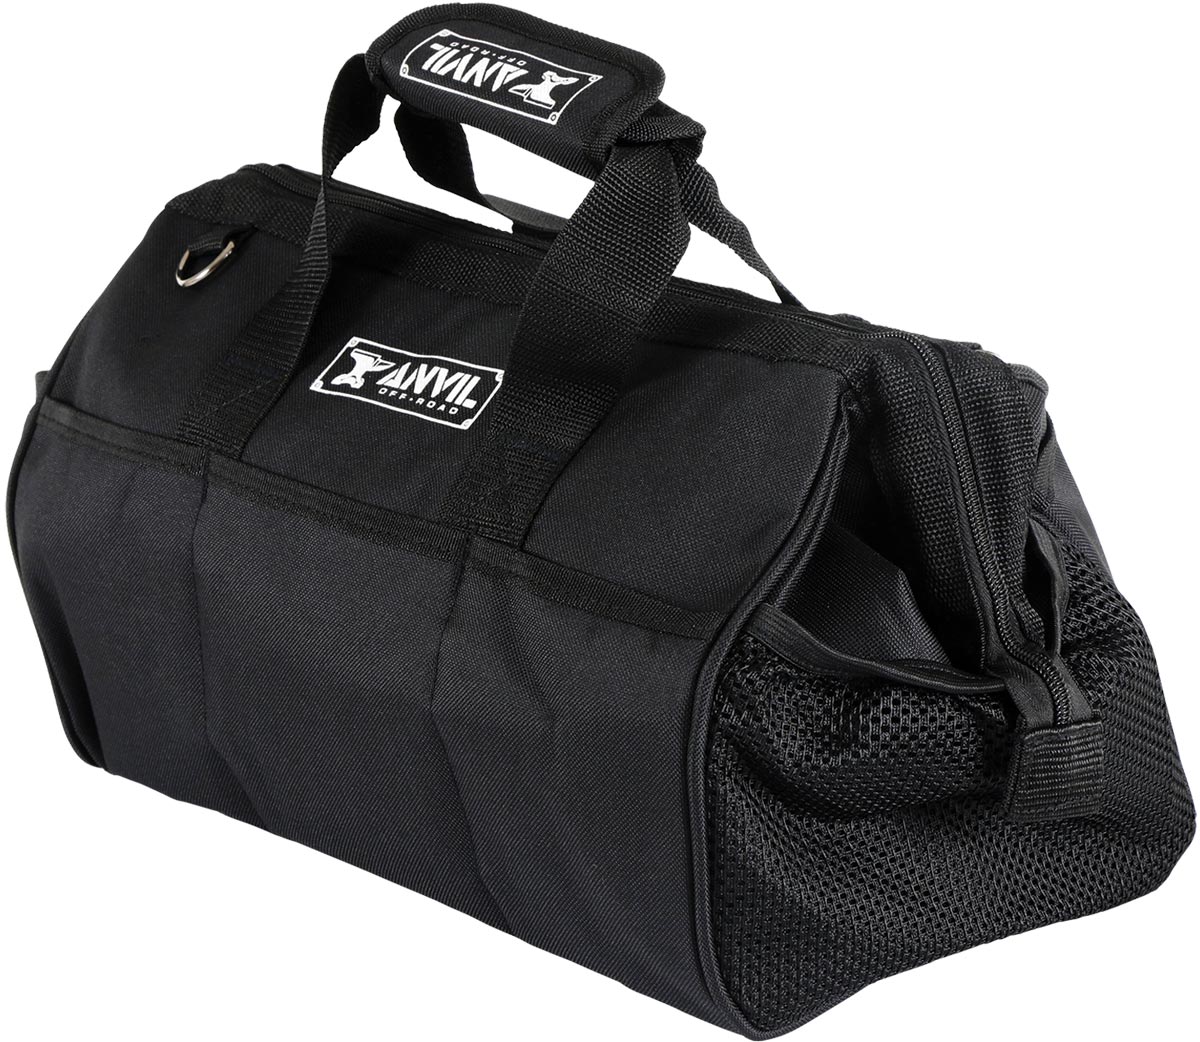 the Anvil Off-Road Tool and Accessory Storage Bag